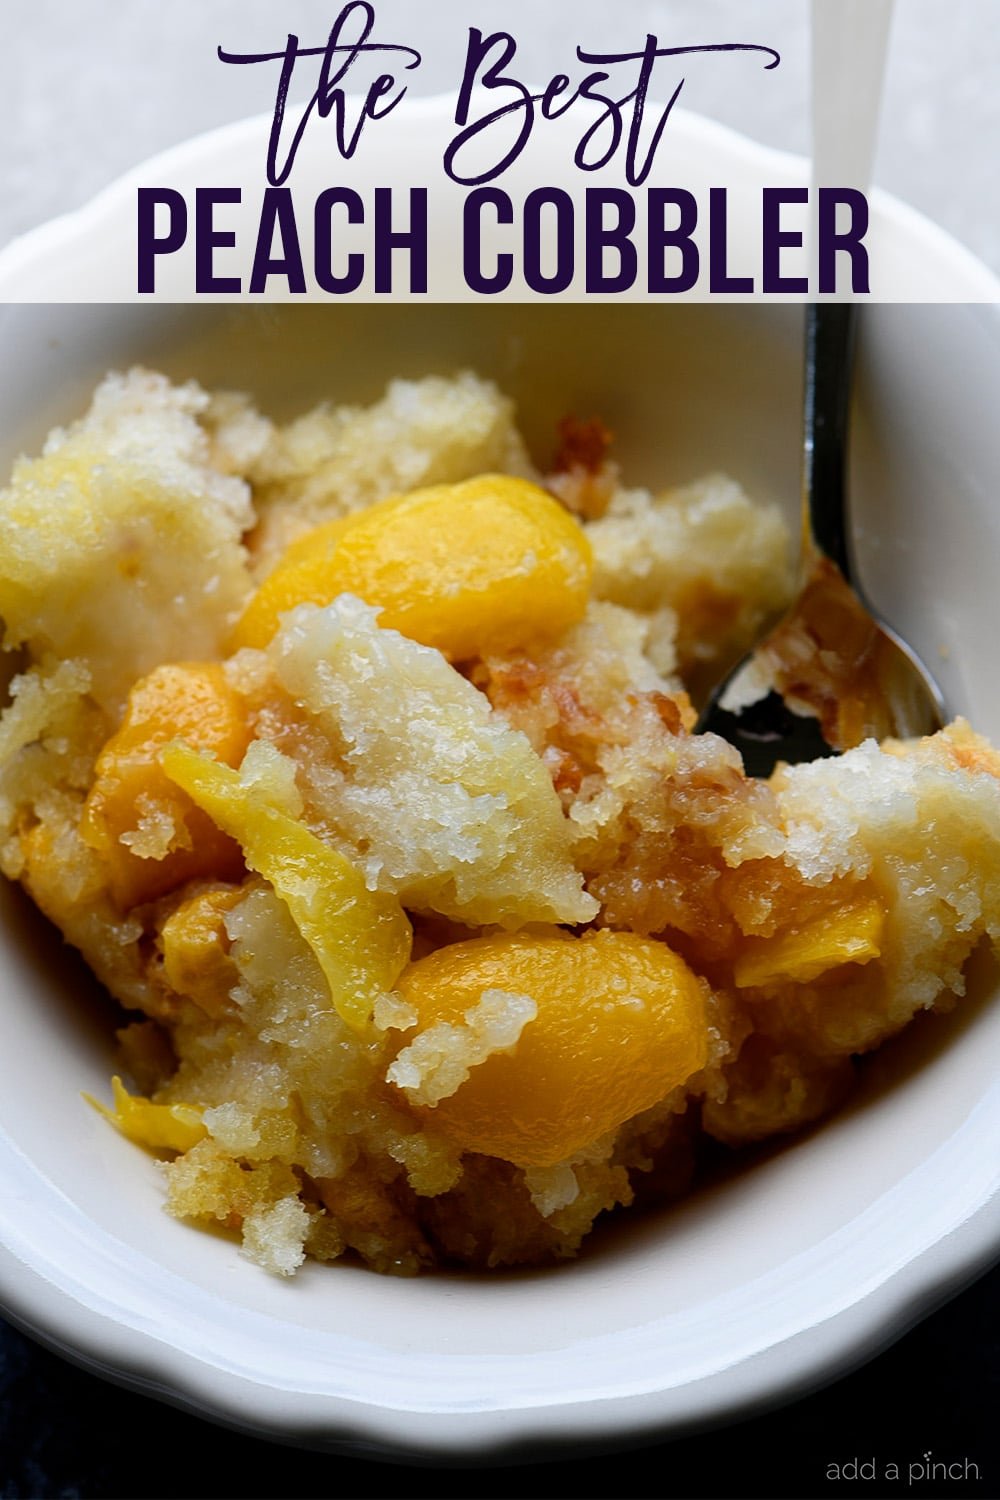 Bowl of Easy Peach Cobbler with spoon - with text - addapinch.com